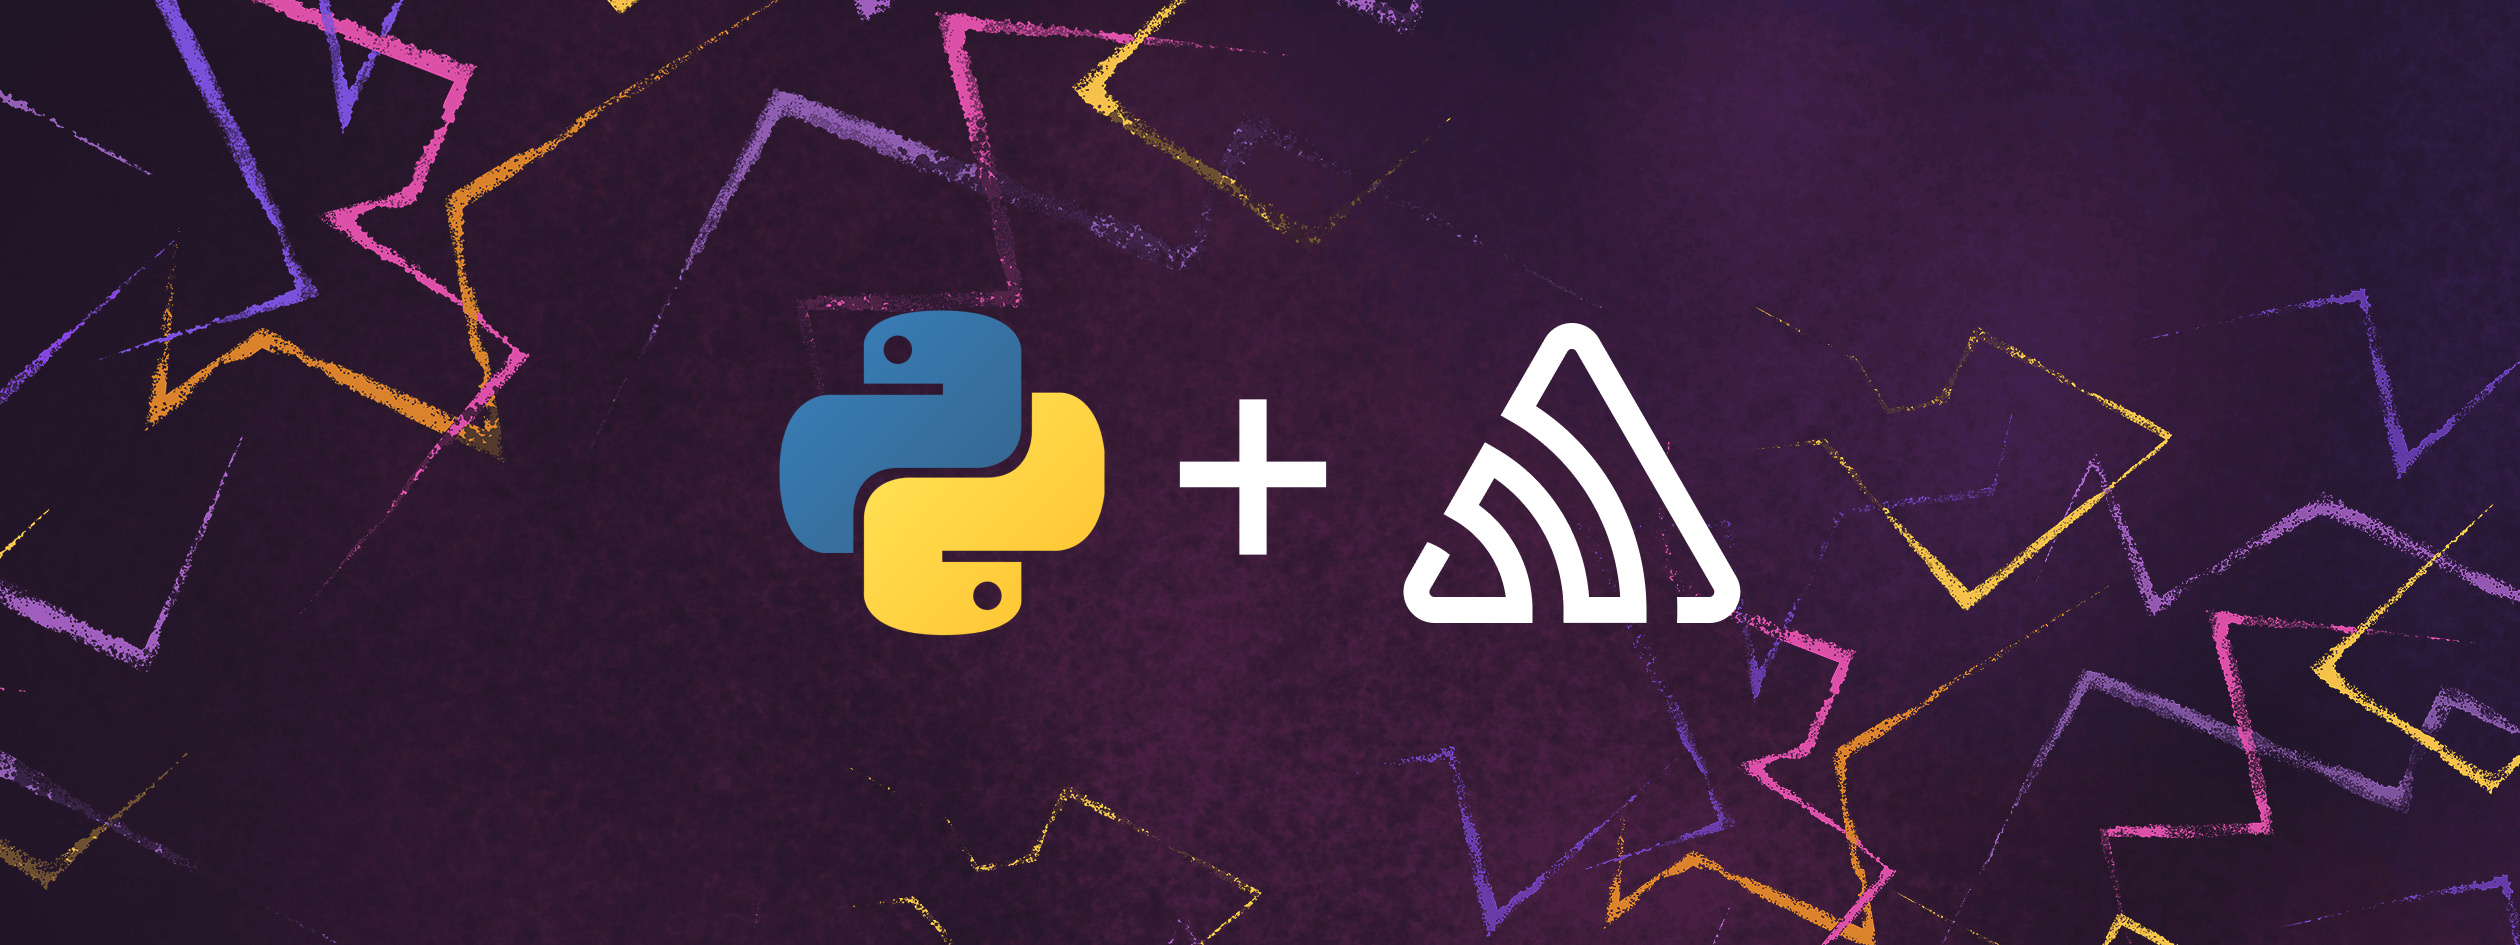 Your Guide to File Handling in Python